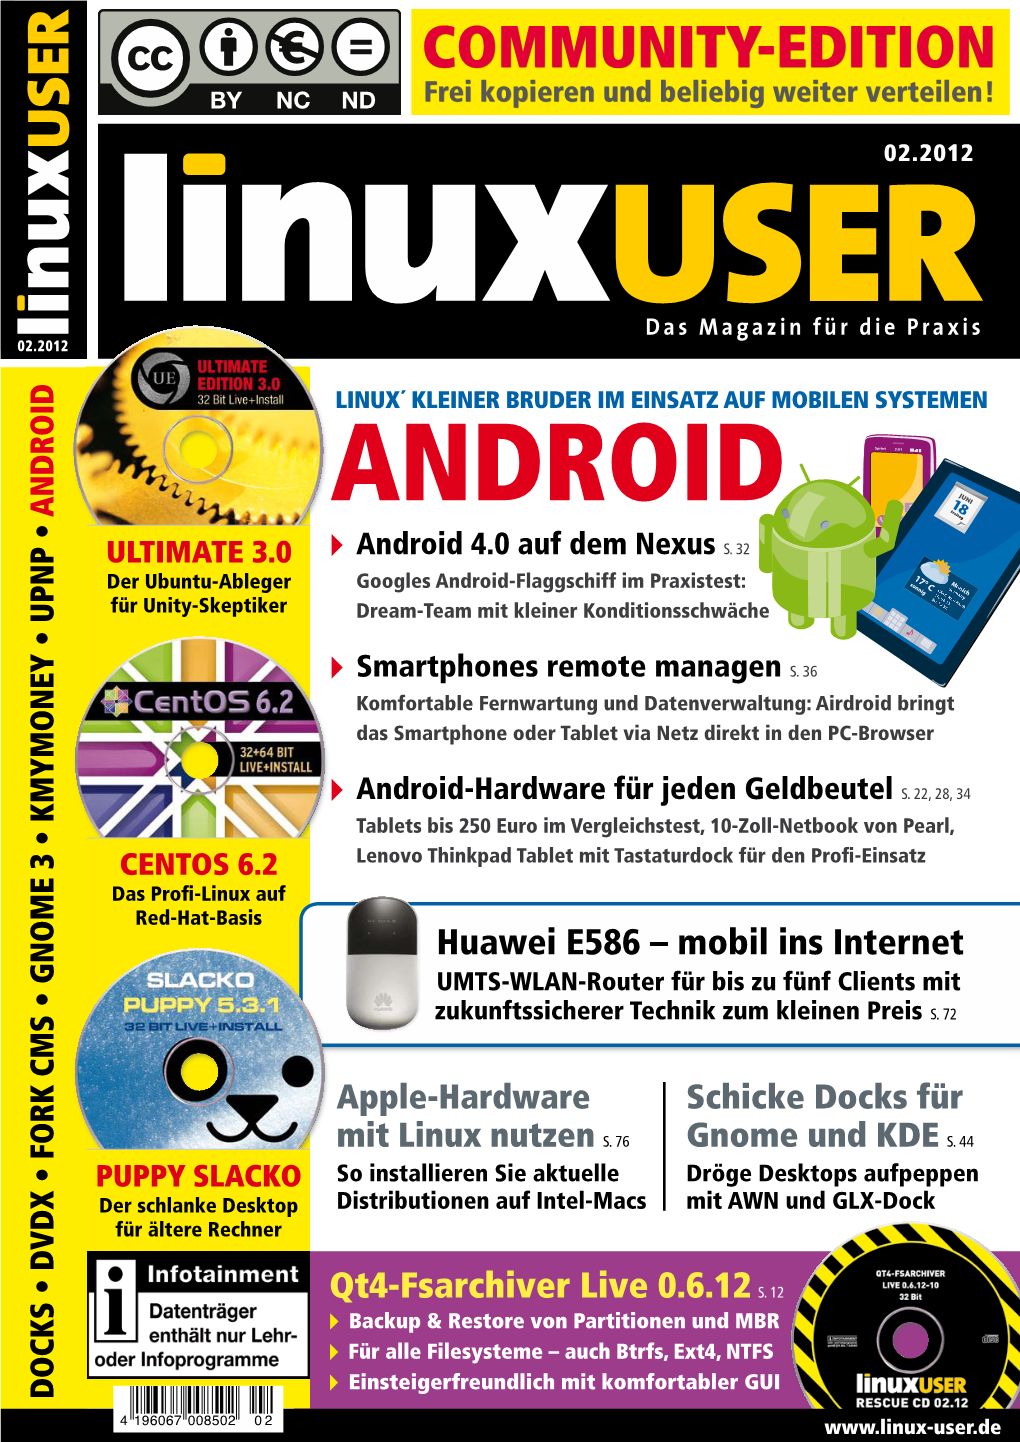 ANDROID ANDROID ULTIMATE 3.0  Android 4.0 Auf Dem Nexus S